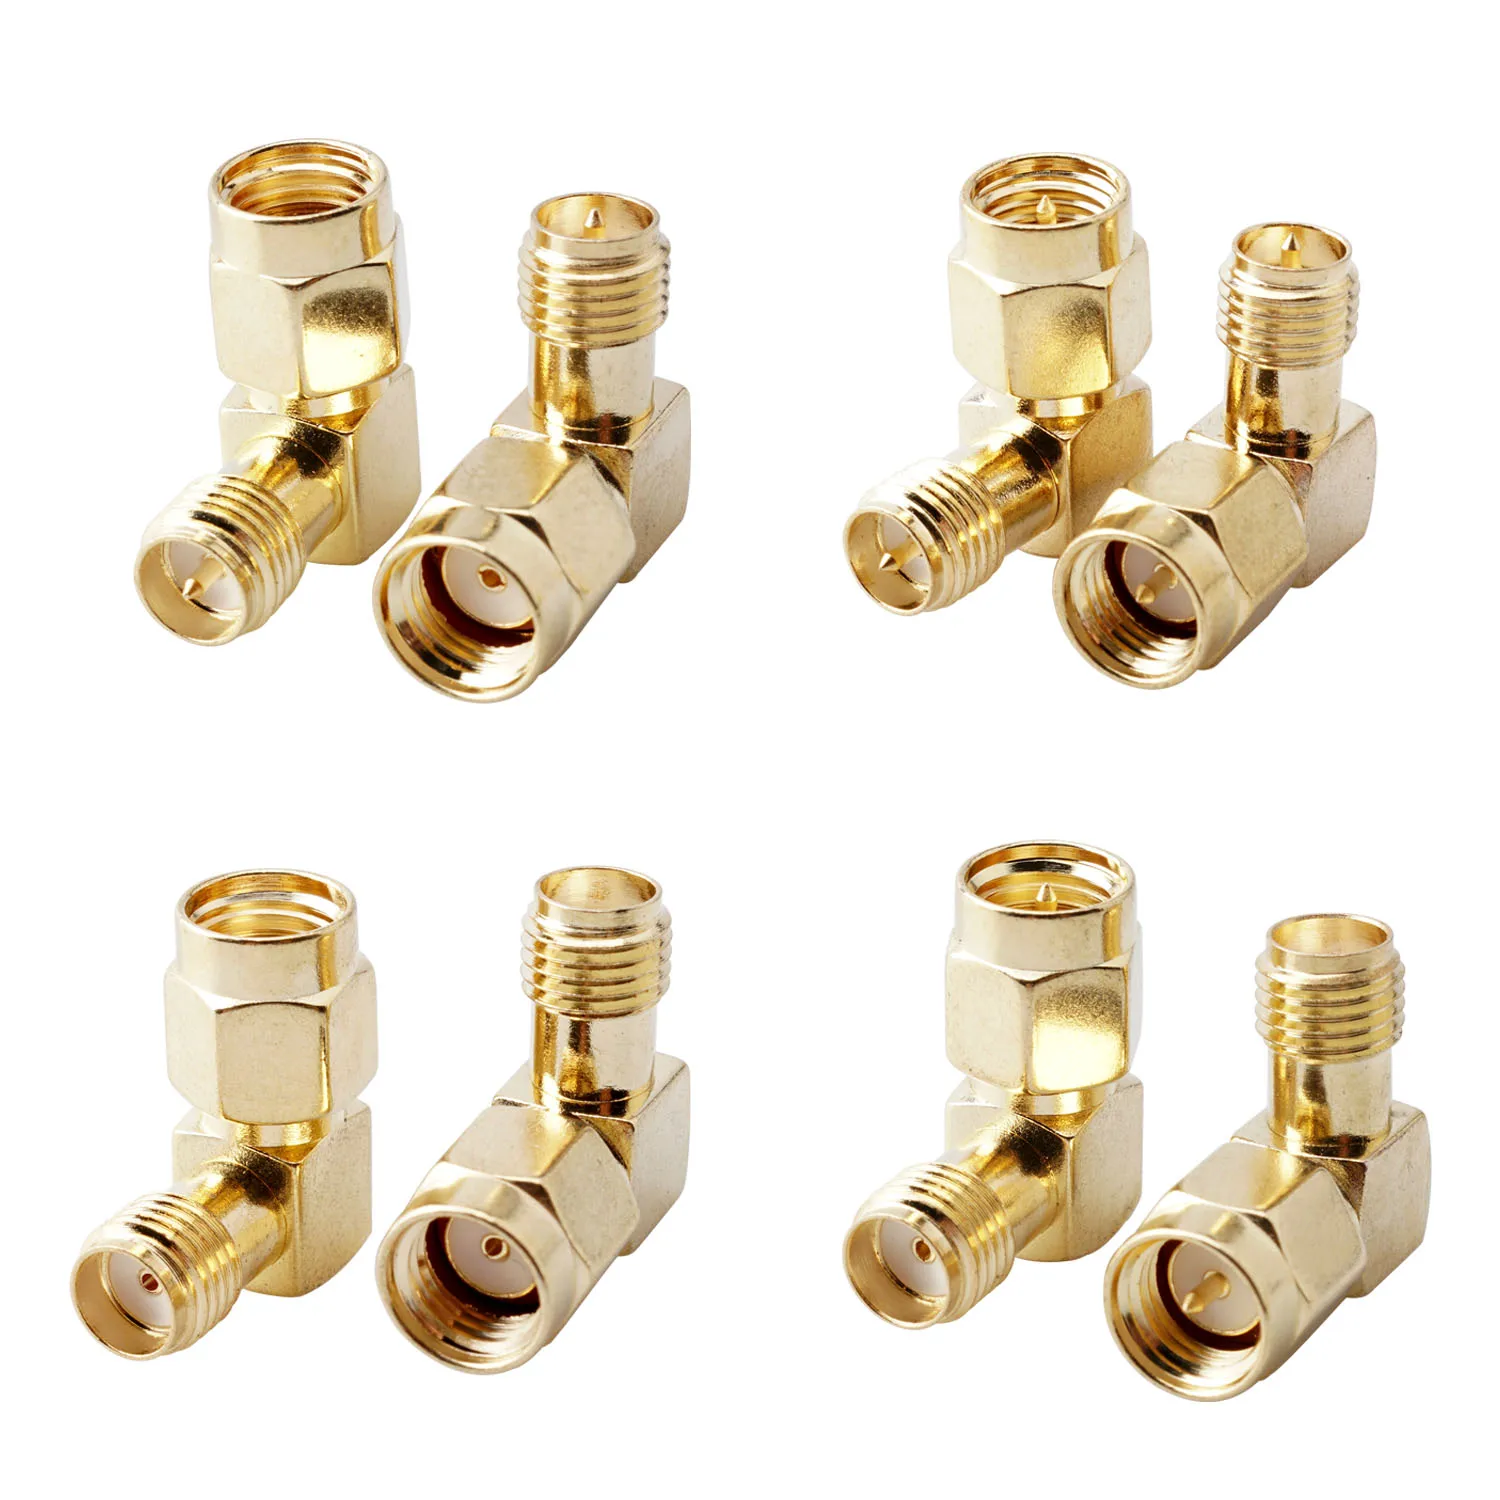 

2pcs/lot SMA Adapter Kits 90 Degree Coaxial Male to Female Connector Right Angle for 2G/3G/4G LTE Antenna/Extension